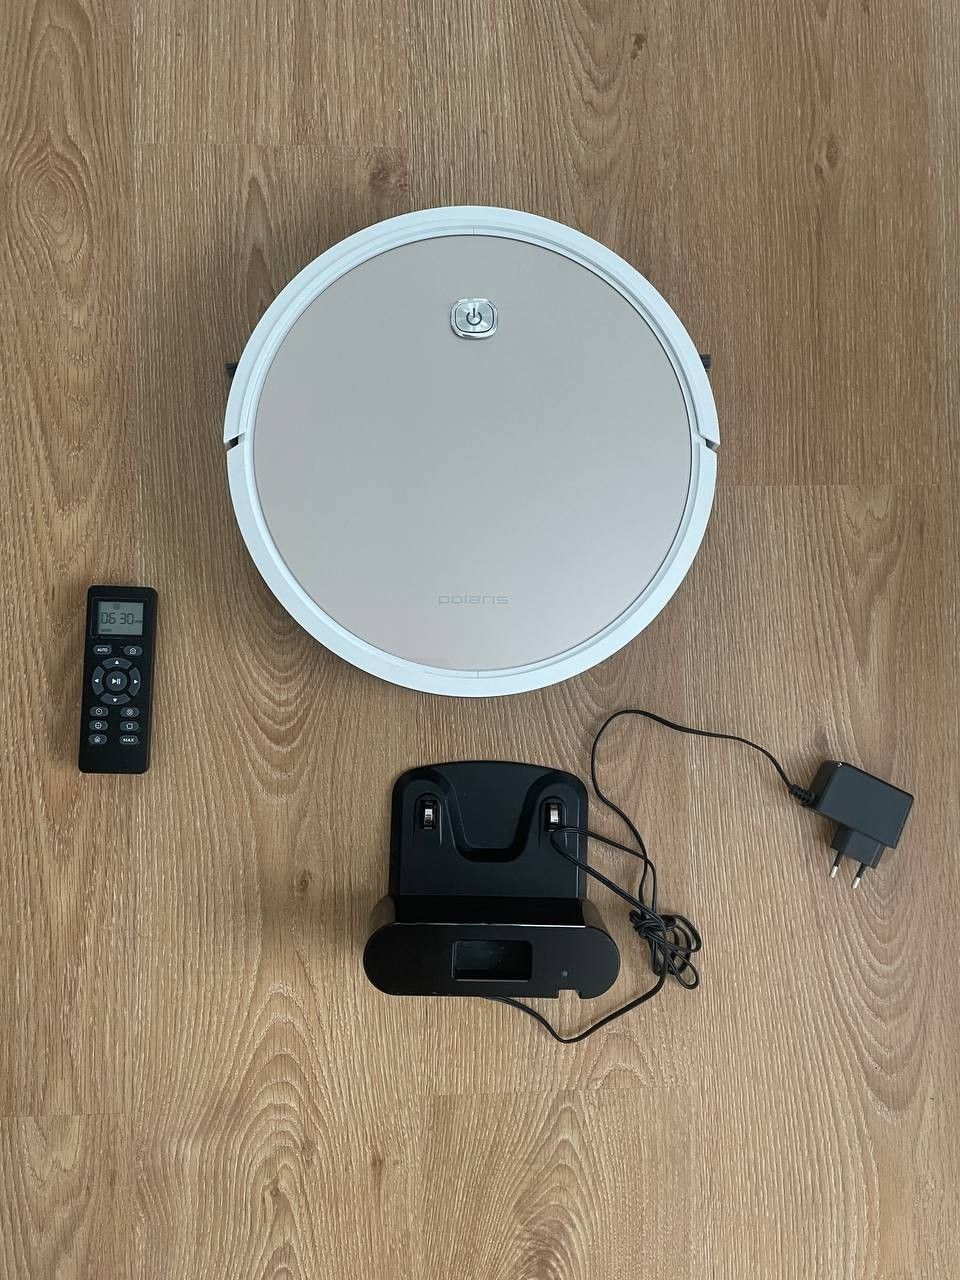 Robot vacuum cleaner with wet cleaning function